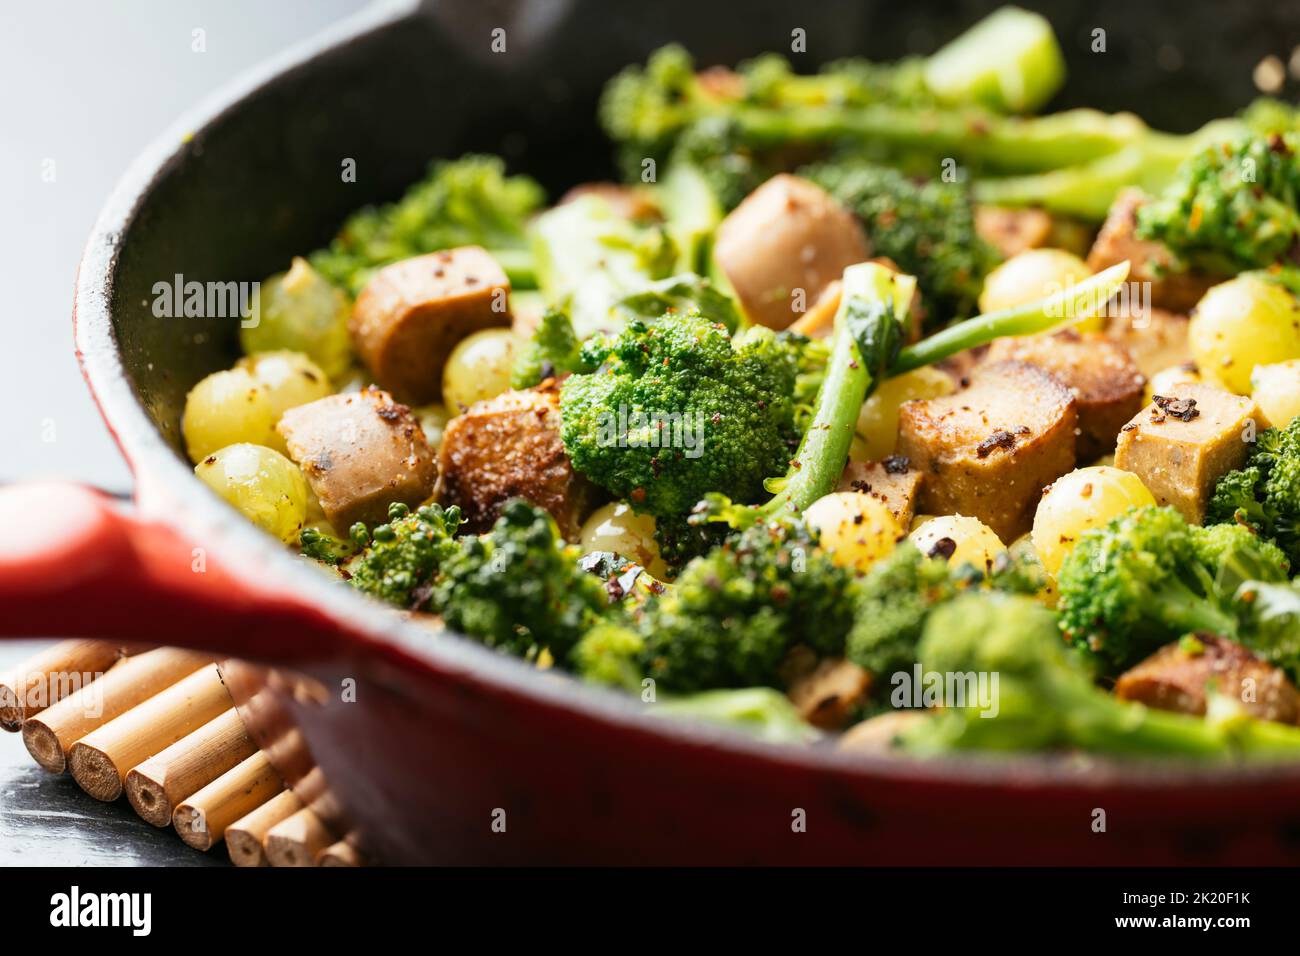 Vegan Sausage with Broccoli and Grapes in a cast iron pan. Stock Photo